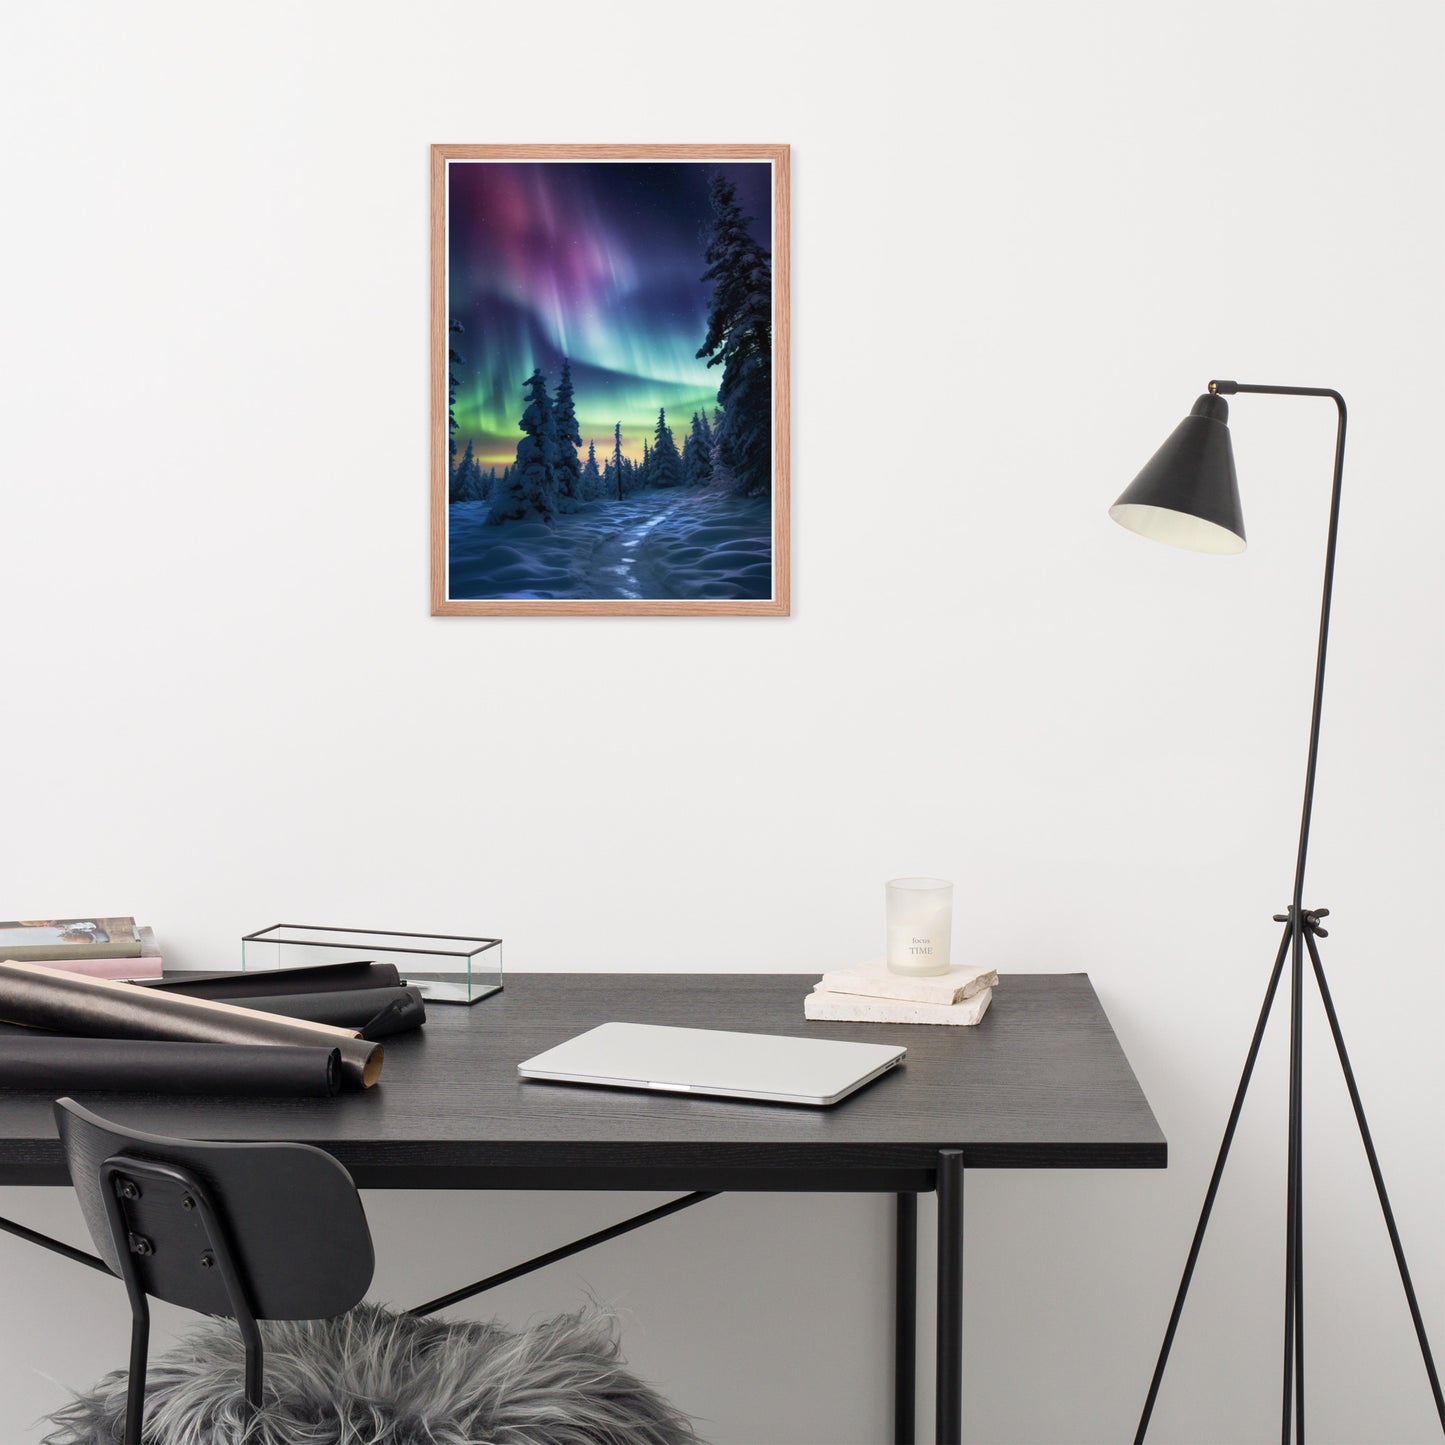 Enchanting Aurora Borealis Framed Posters - Multi Size Personalized Northern Light View - Modern Wall Art - Perfect Aurora Lovers Gift 4